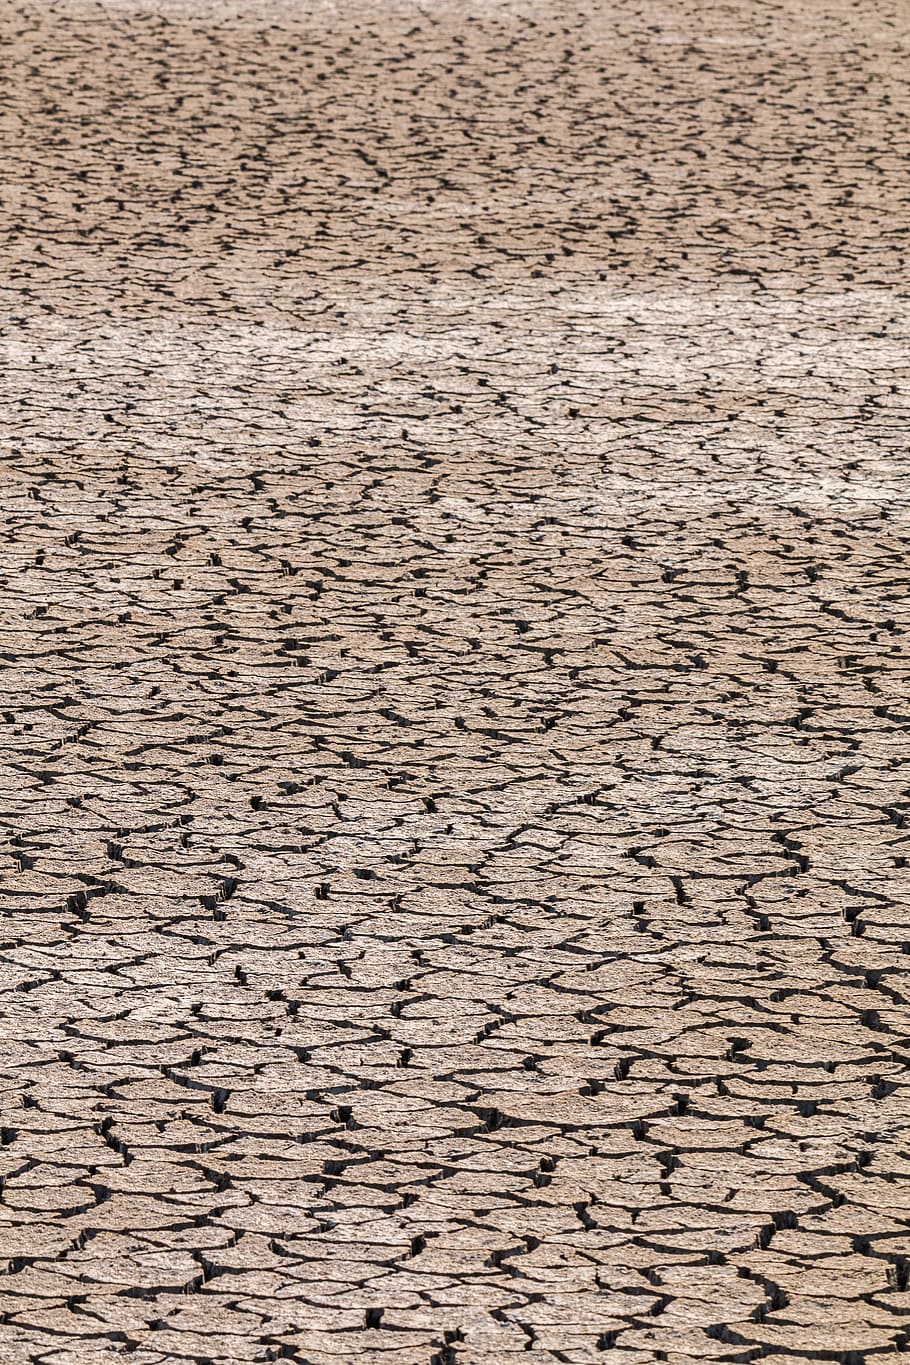 drought, ground, cracks, dehydrated, dry, swamp, landscape, backgrounds, full frame, pattern